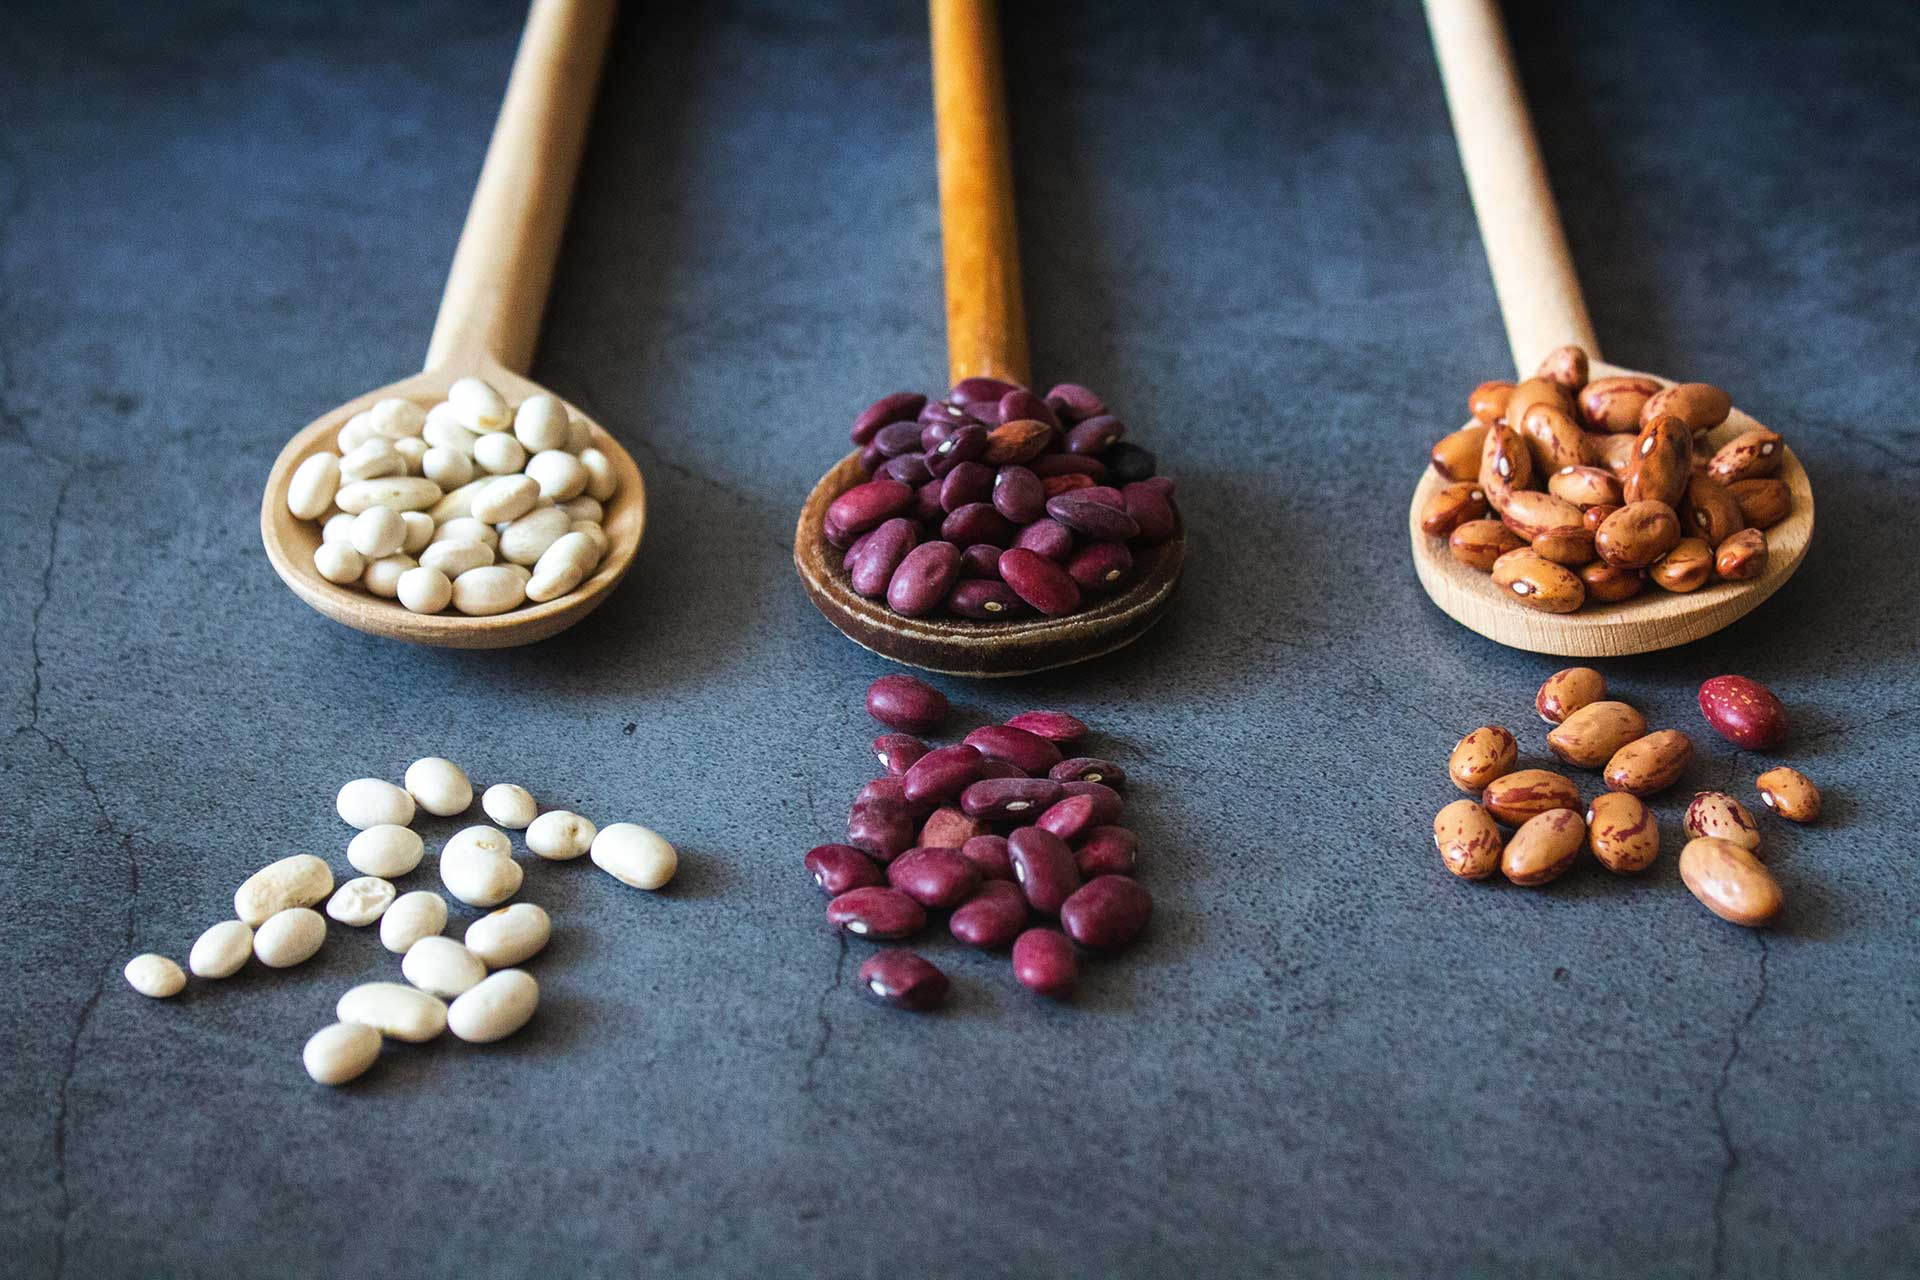 Three types of beans. White, red, and brown.